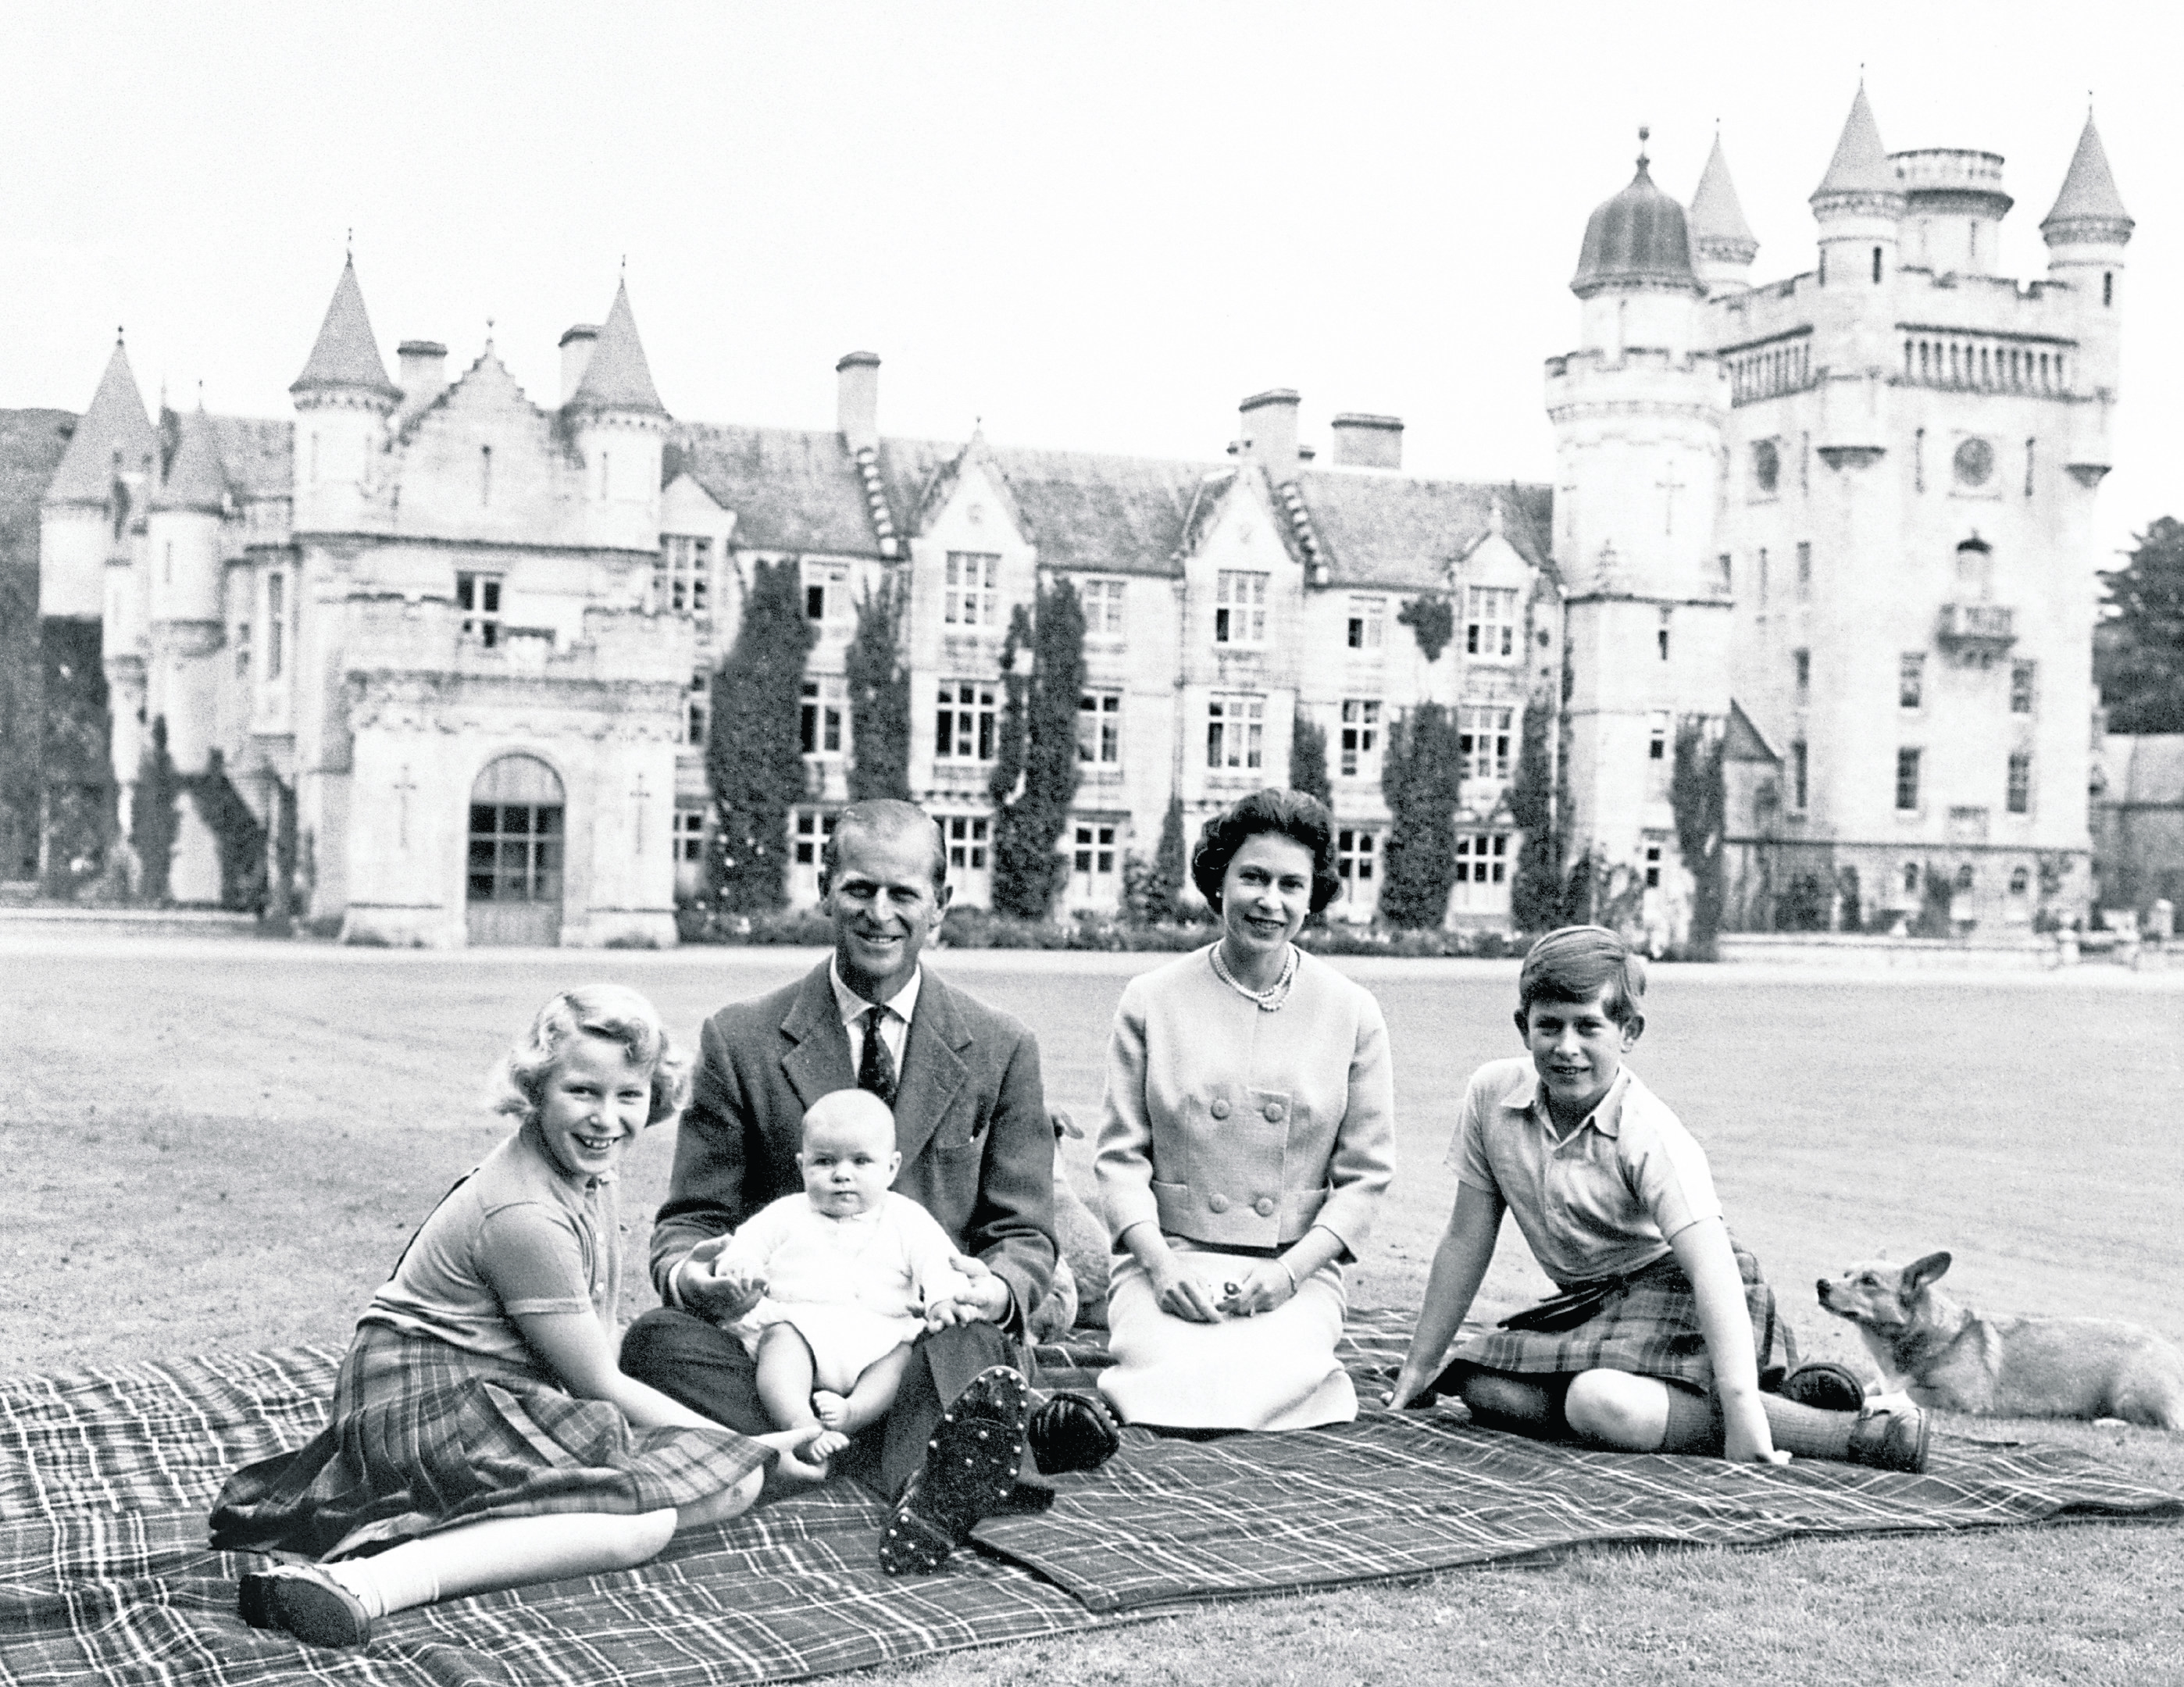 The Queen and Prince Philip with Princess Anne, Prince Charles and baby Prince Andrew at Balmoral on Deeside